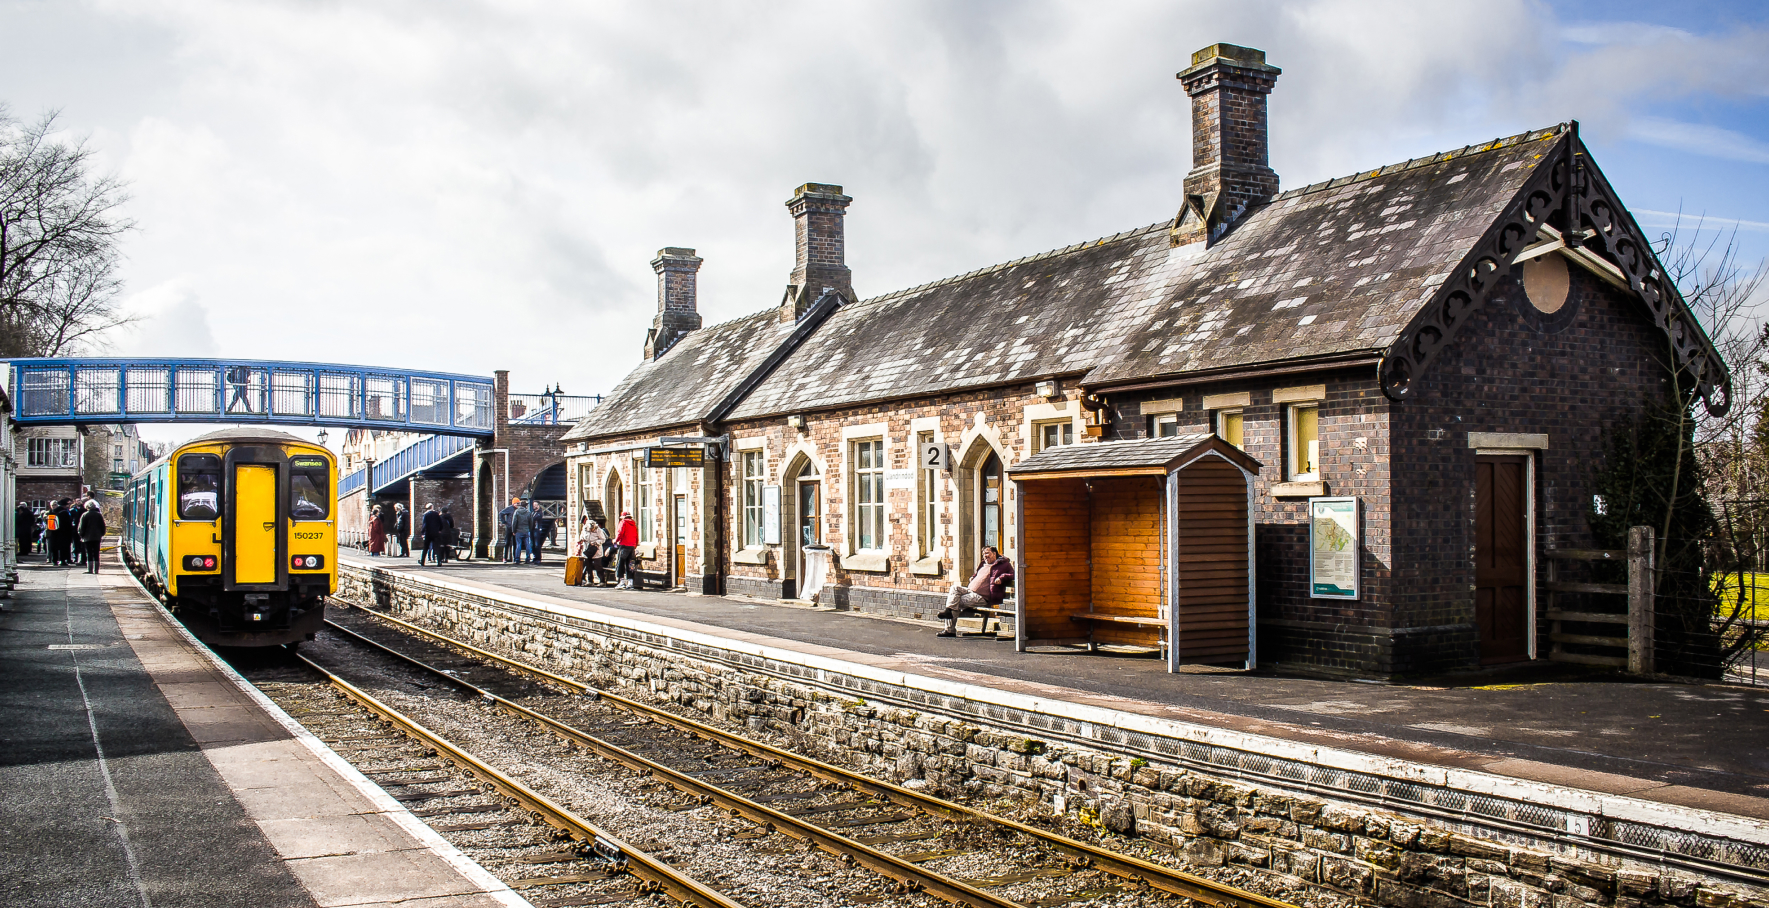 Image of Llandrindood Wells station with a train approaching the platform